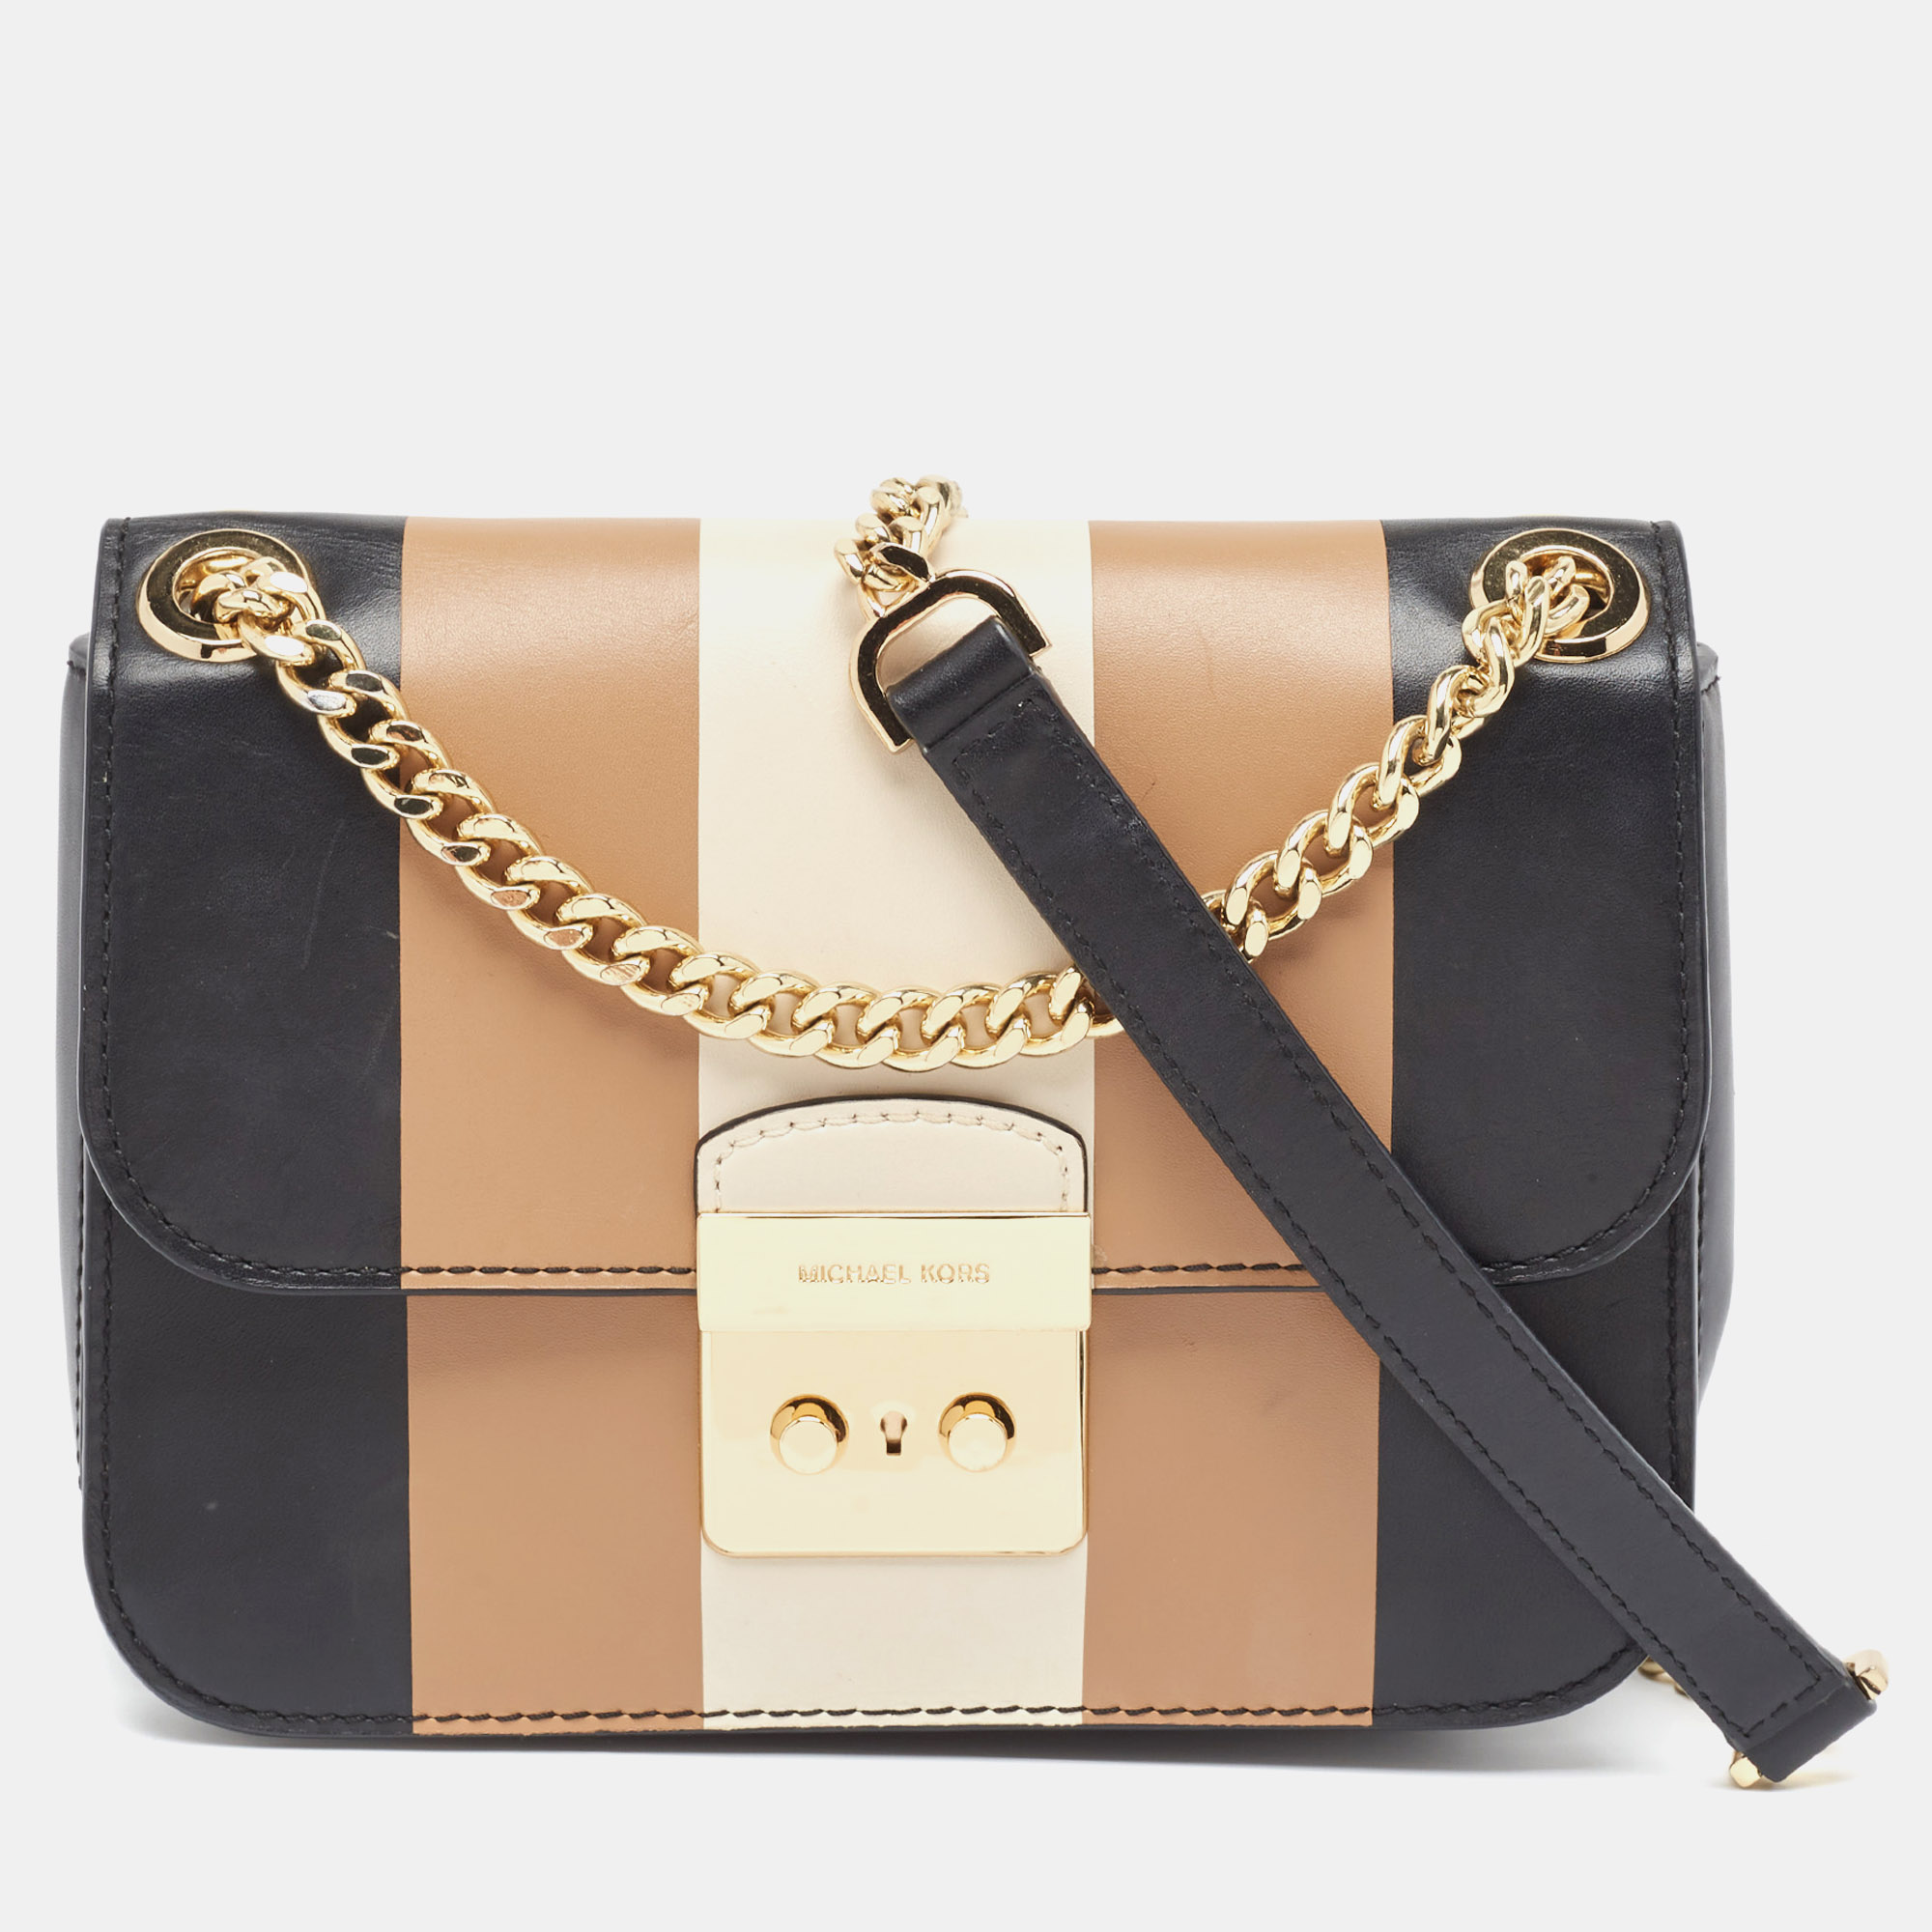 Indulge in luxury with this Michael Kors shoulder bag. Meticulously crafted from premium materials it combines exquisite design impeccable craftsmanship and timeless elegance. Elevate your style with this fashion accessory.